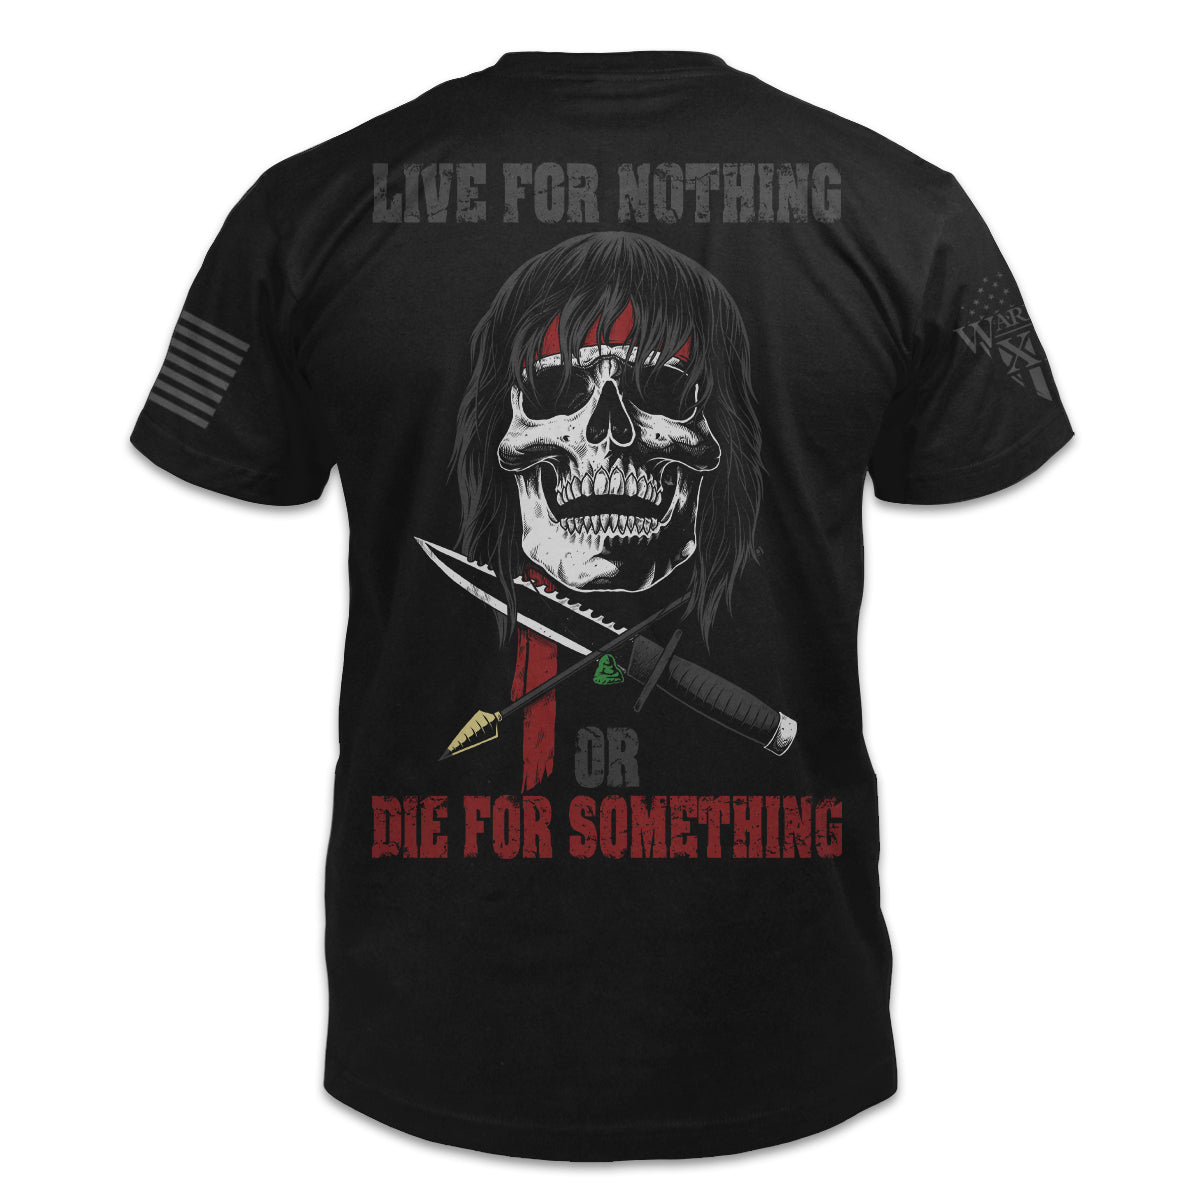 A black t-shirt with the words "Live for nothing, or die for something" with a skull of Rambo printed on the back of the shirt.